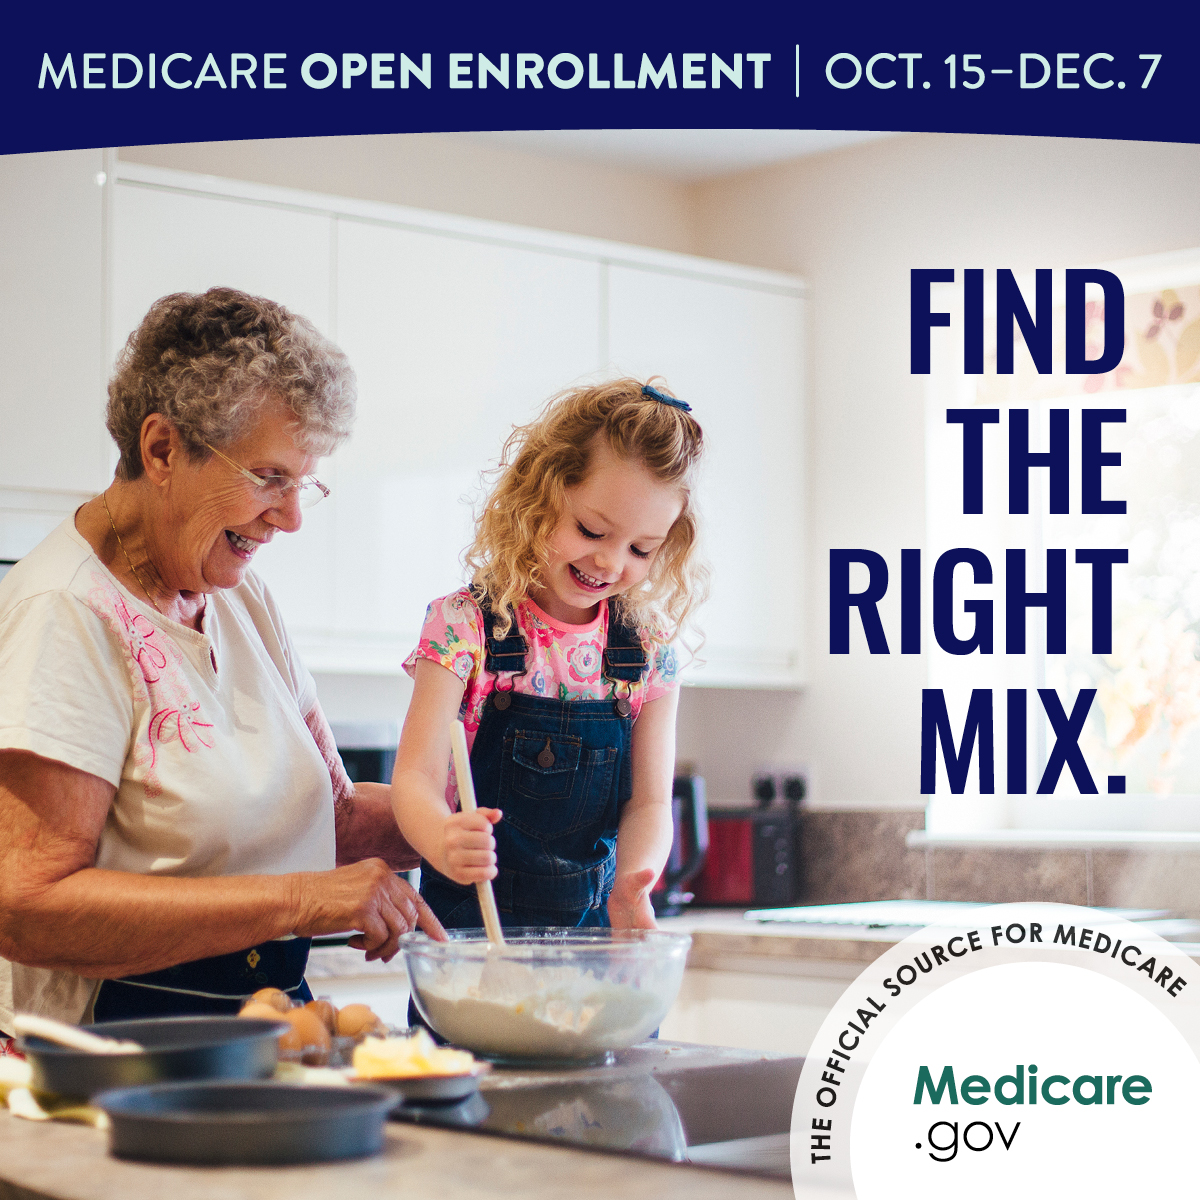 Enroll in Medicare today!